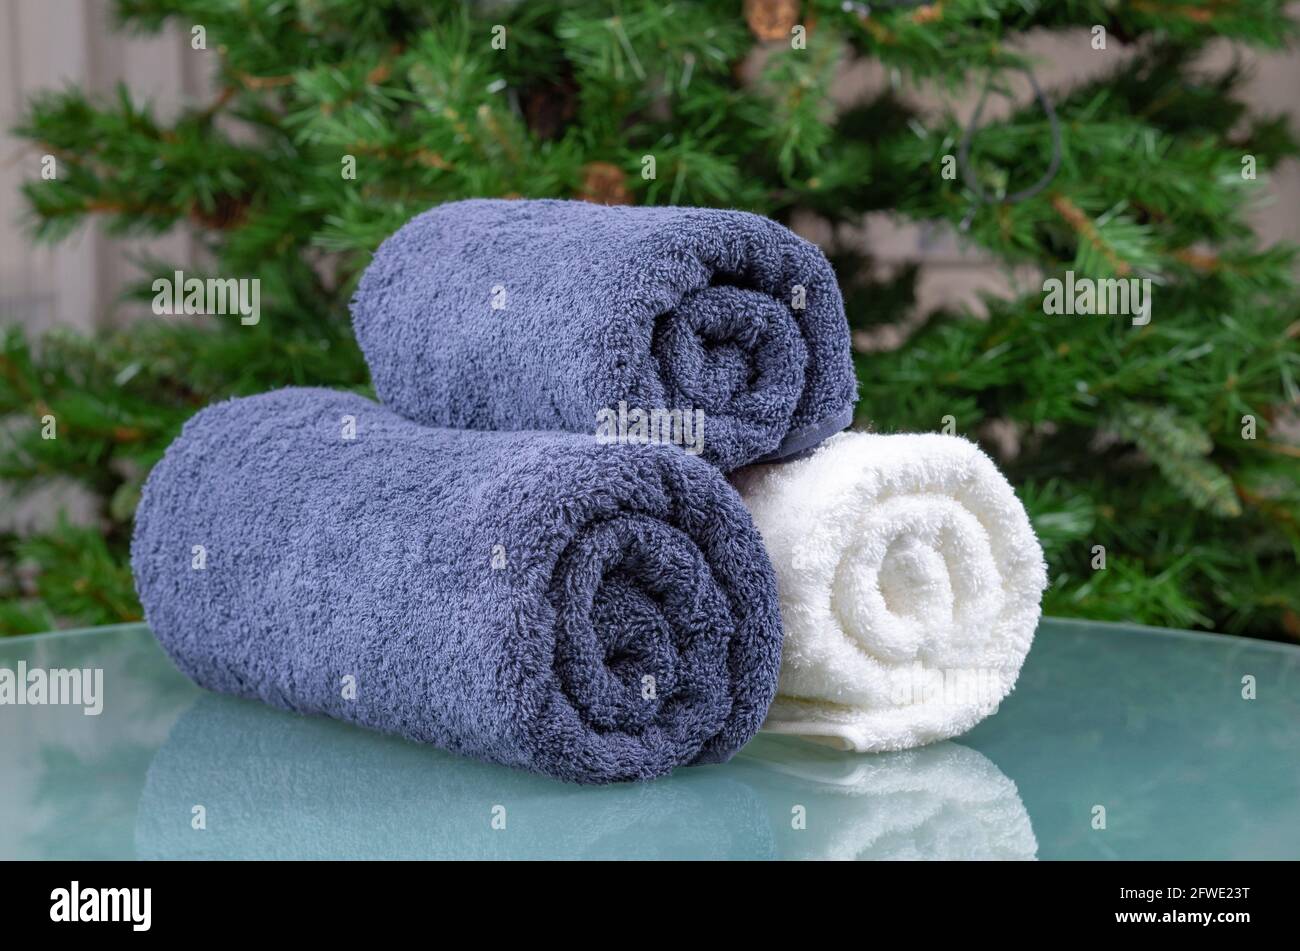 https://c8.alamy.com/comp/2FWE23T/towels-close-up-of-rolled-white-and-blue-fluffy-towels-beauty-and-massage-spa-concept-luxury-hotel-2FWE23T.jpg